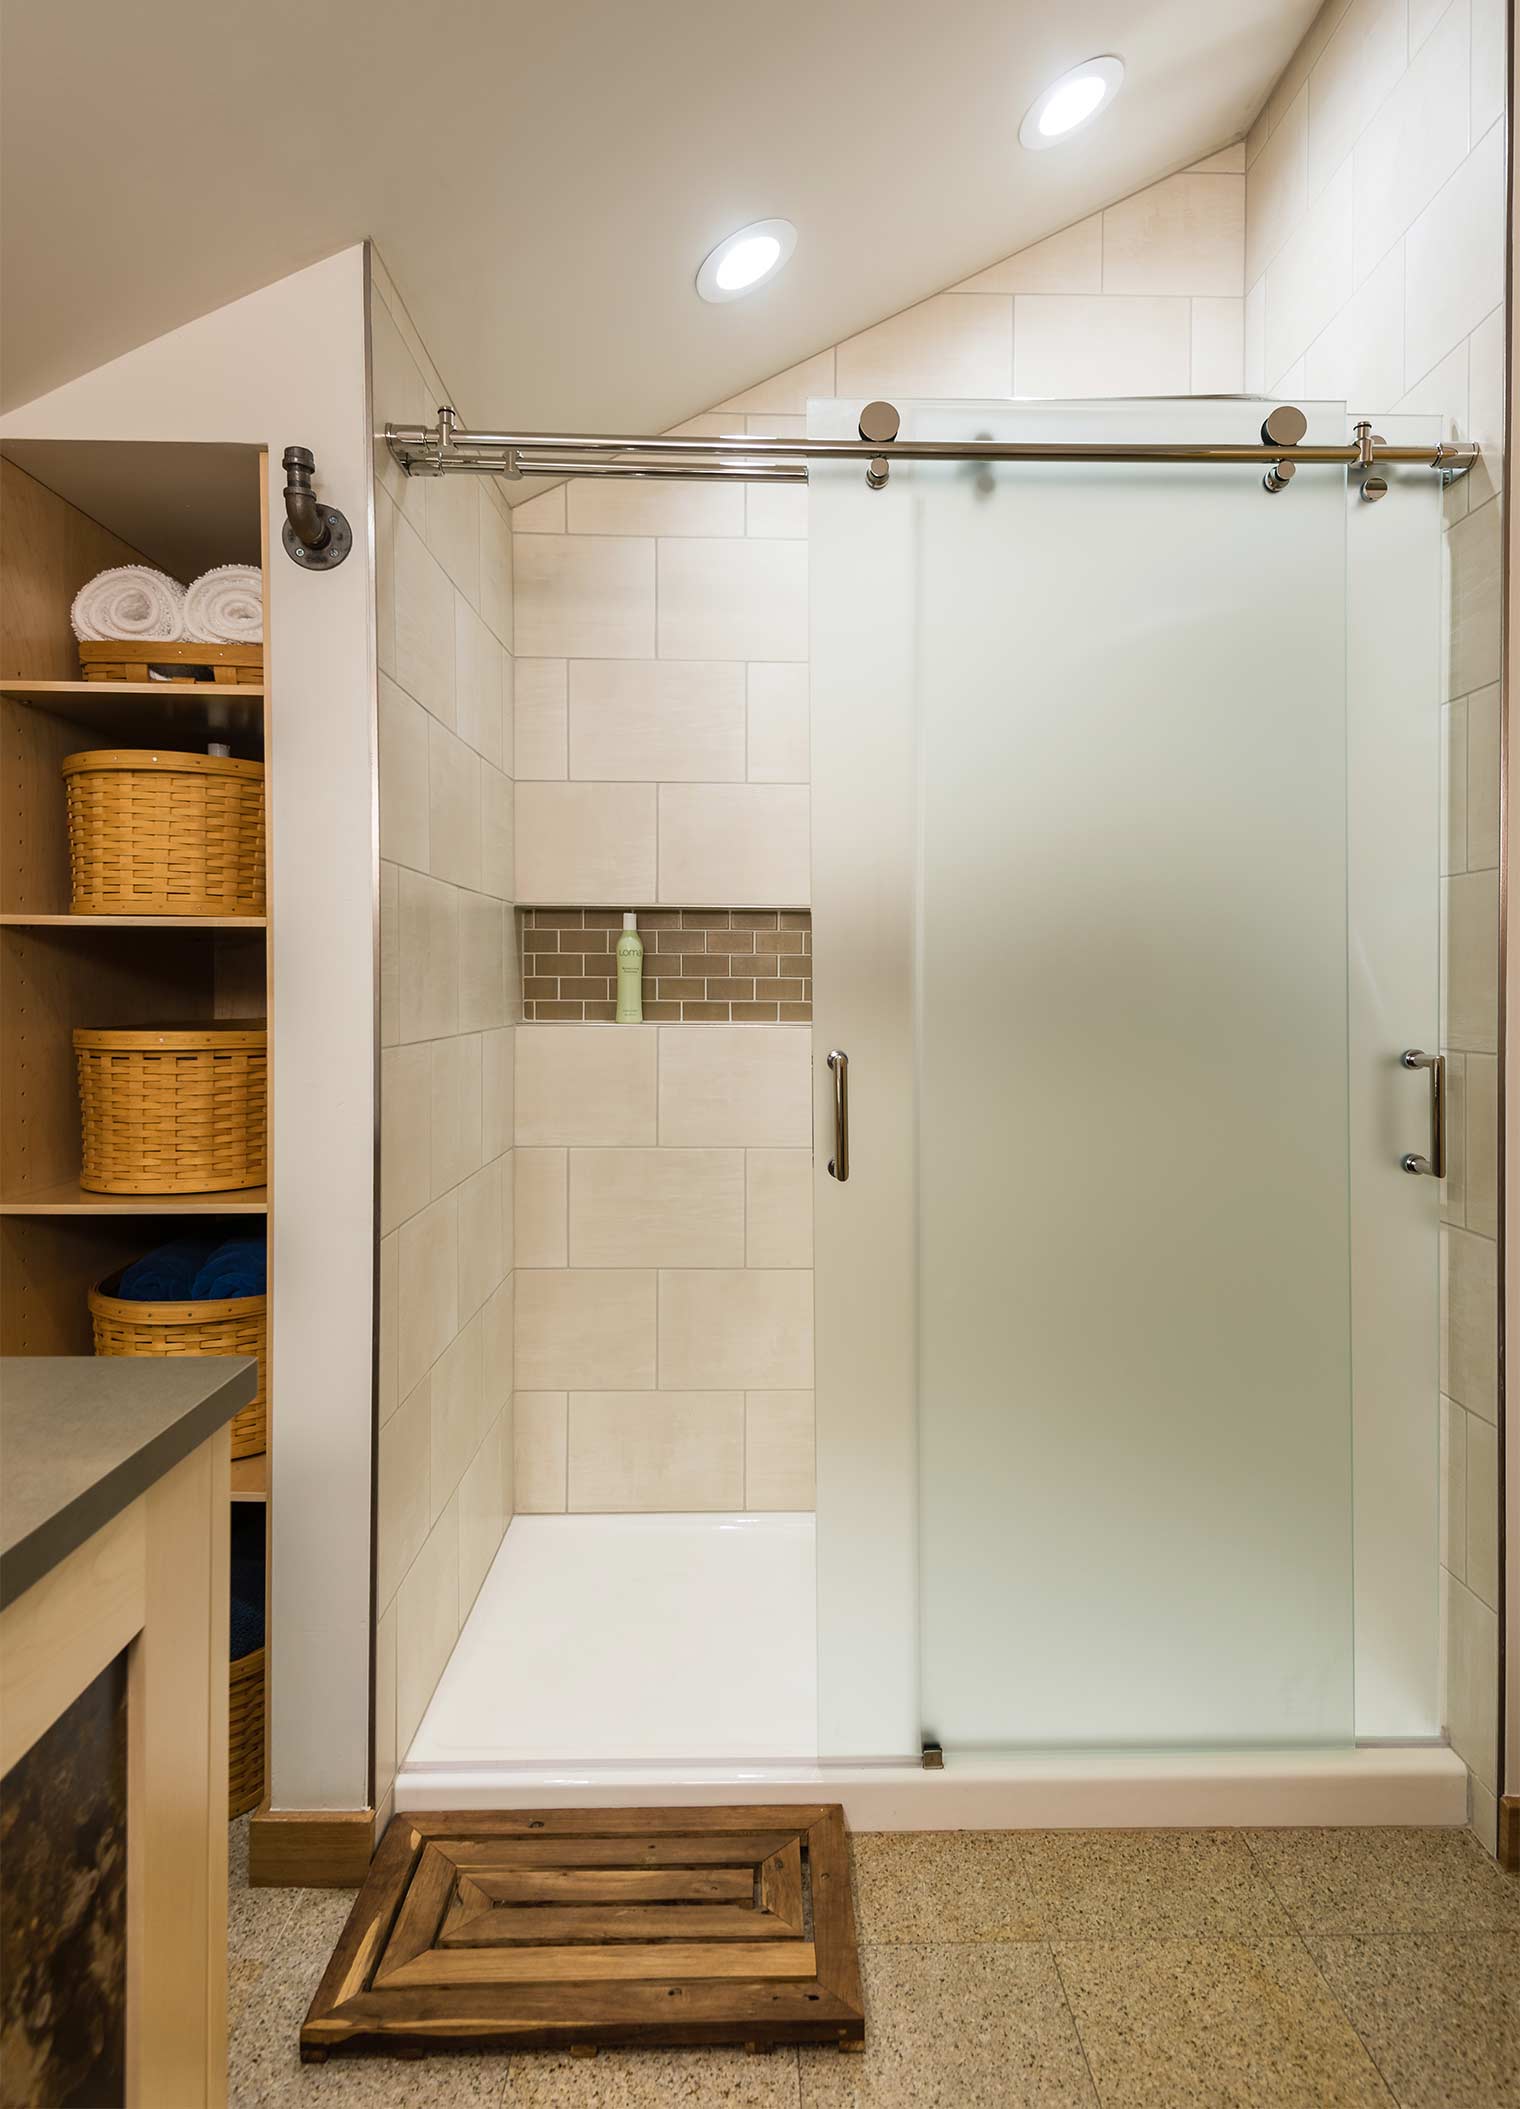 frosted glass sliding shower doors hang from chrome rolling bar in ceramic tiled shower with open shelving unit in Johnston bathroom by remodeler Silent Rivers